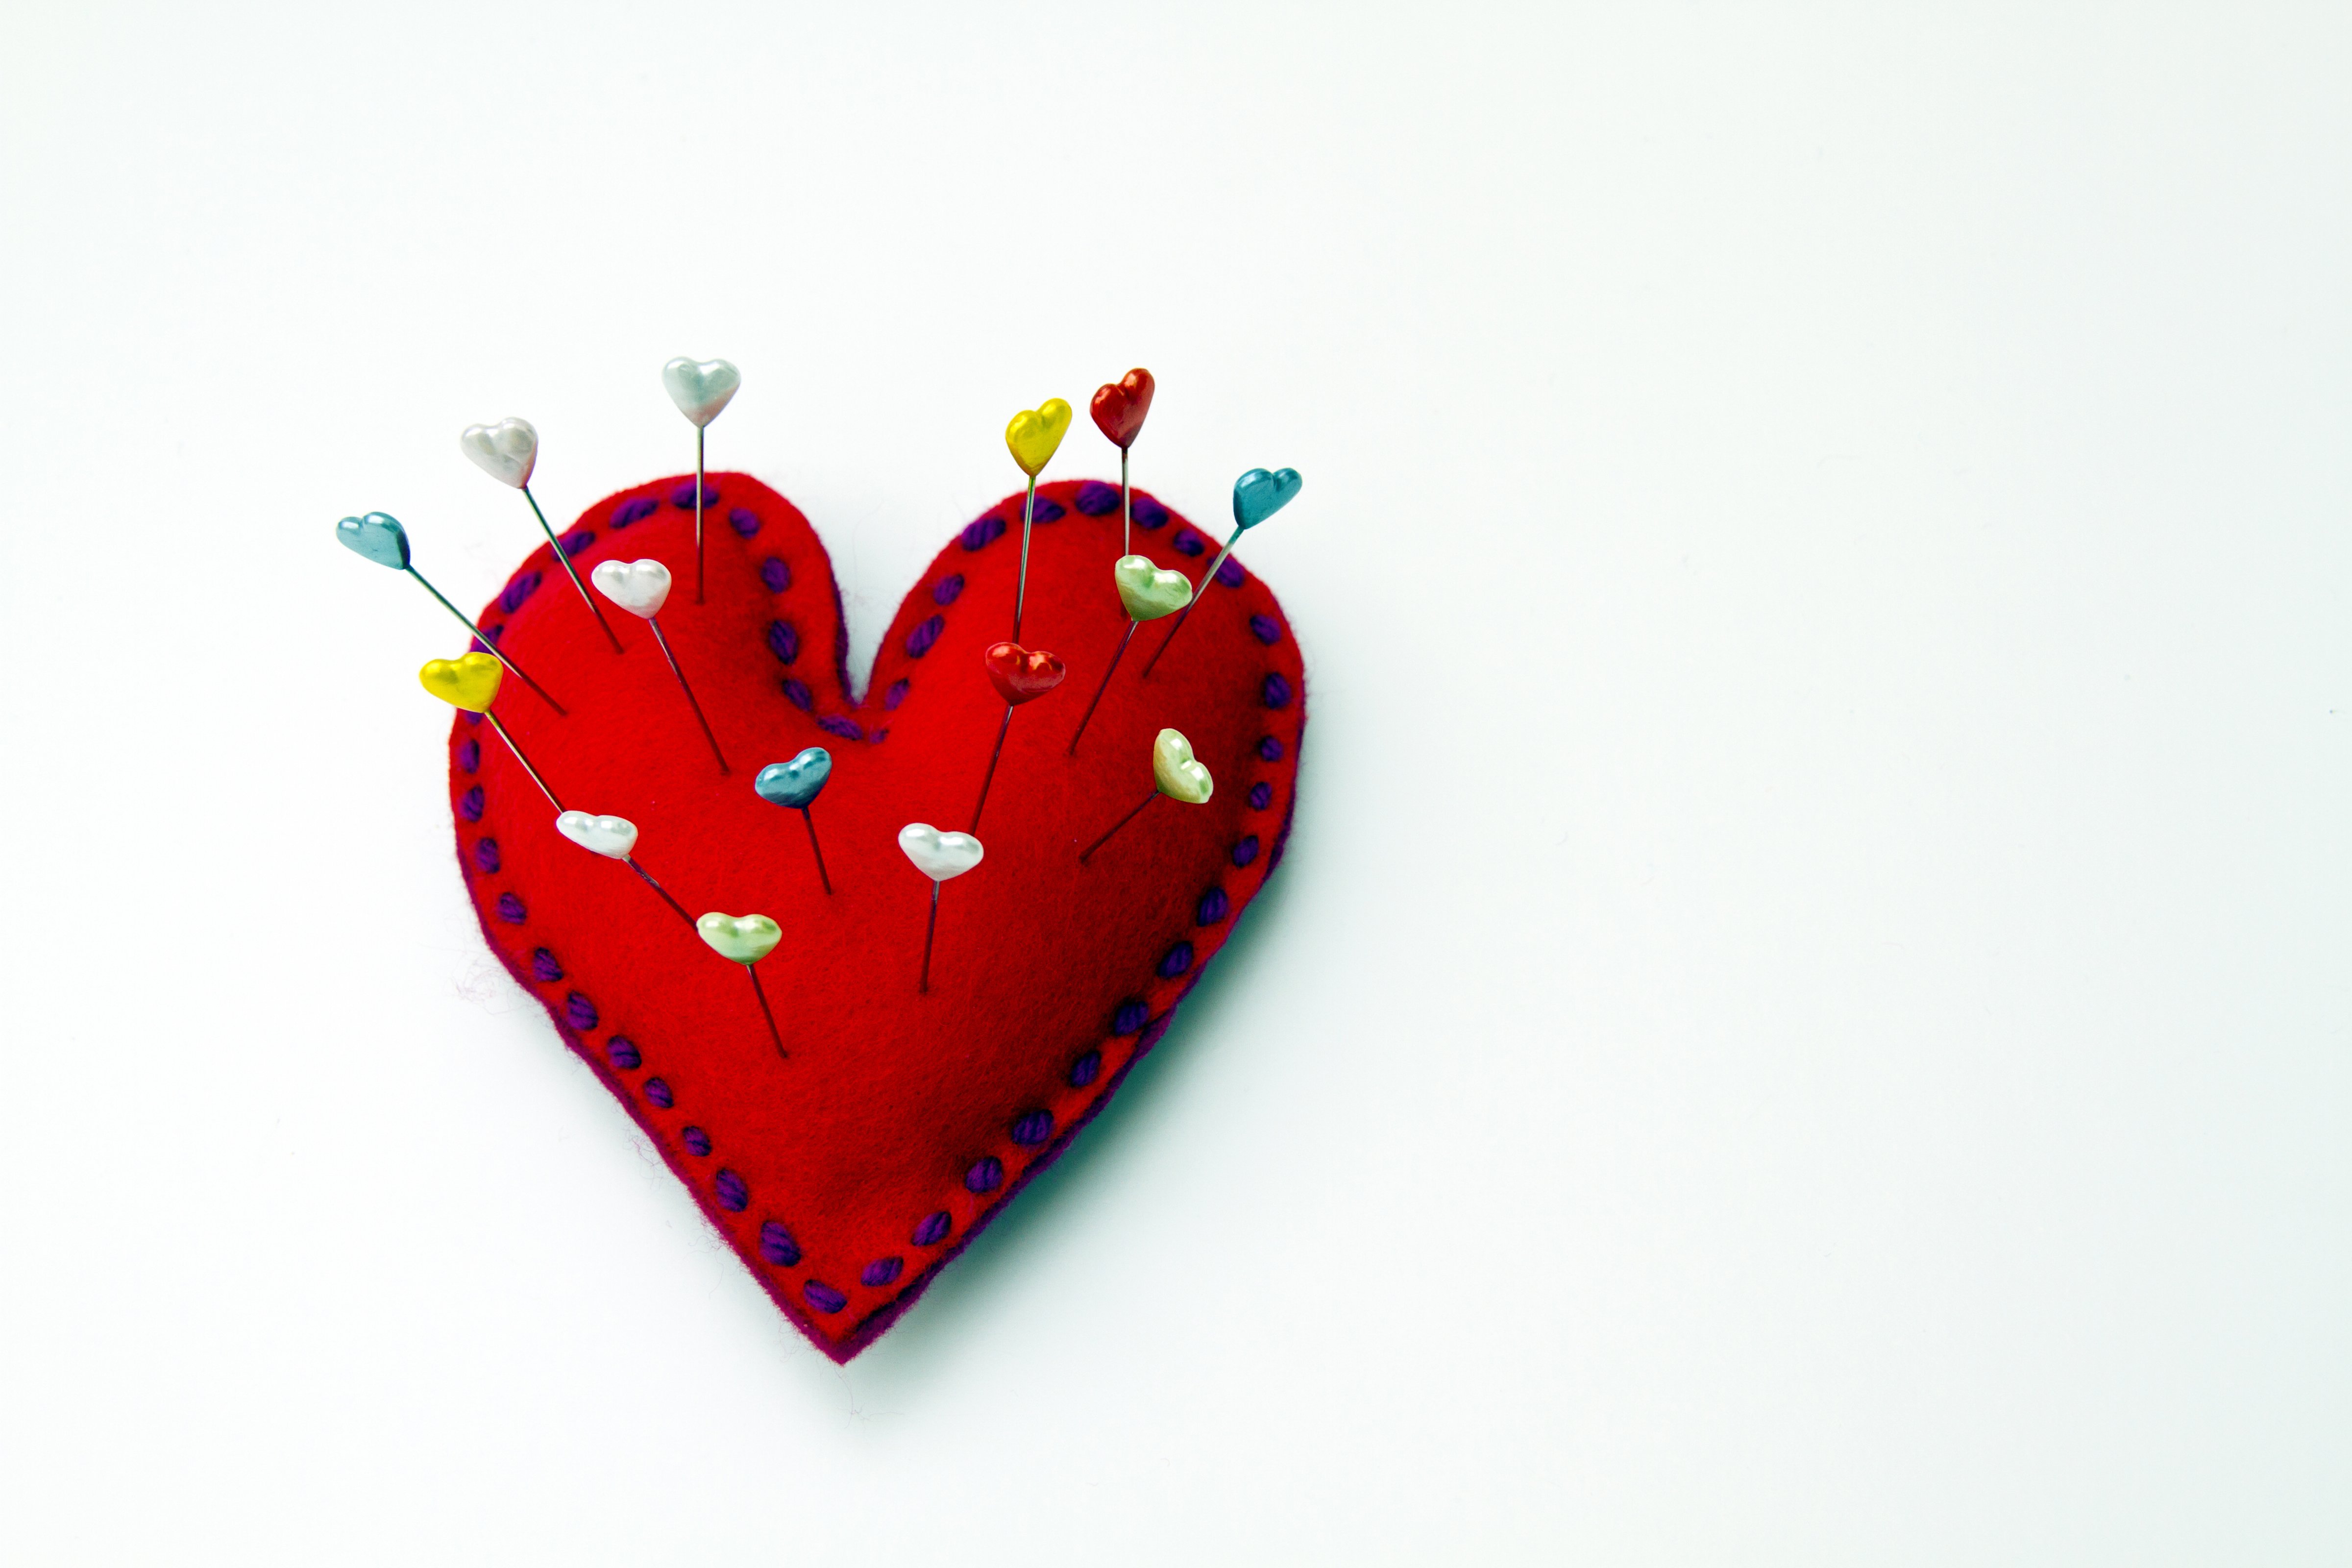 Heart shaped pin cushion with heart pins (Getty Images)